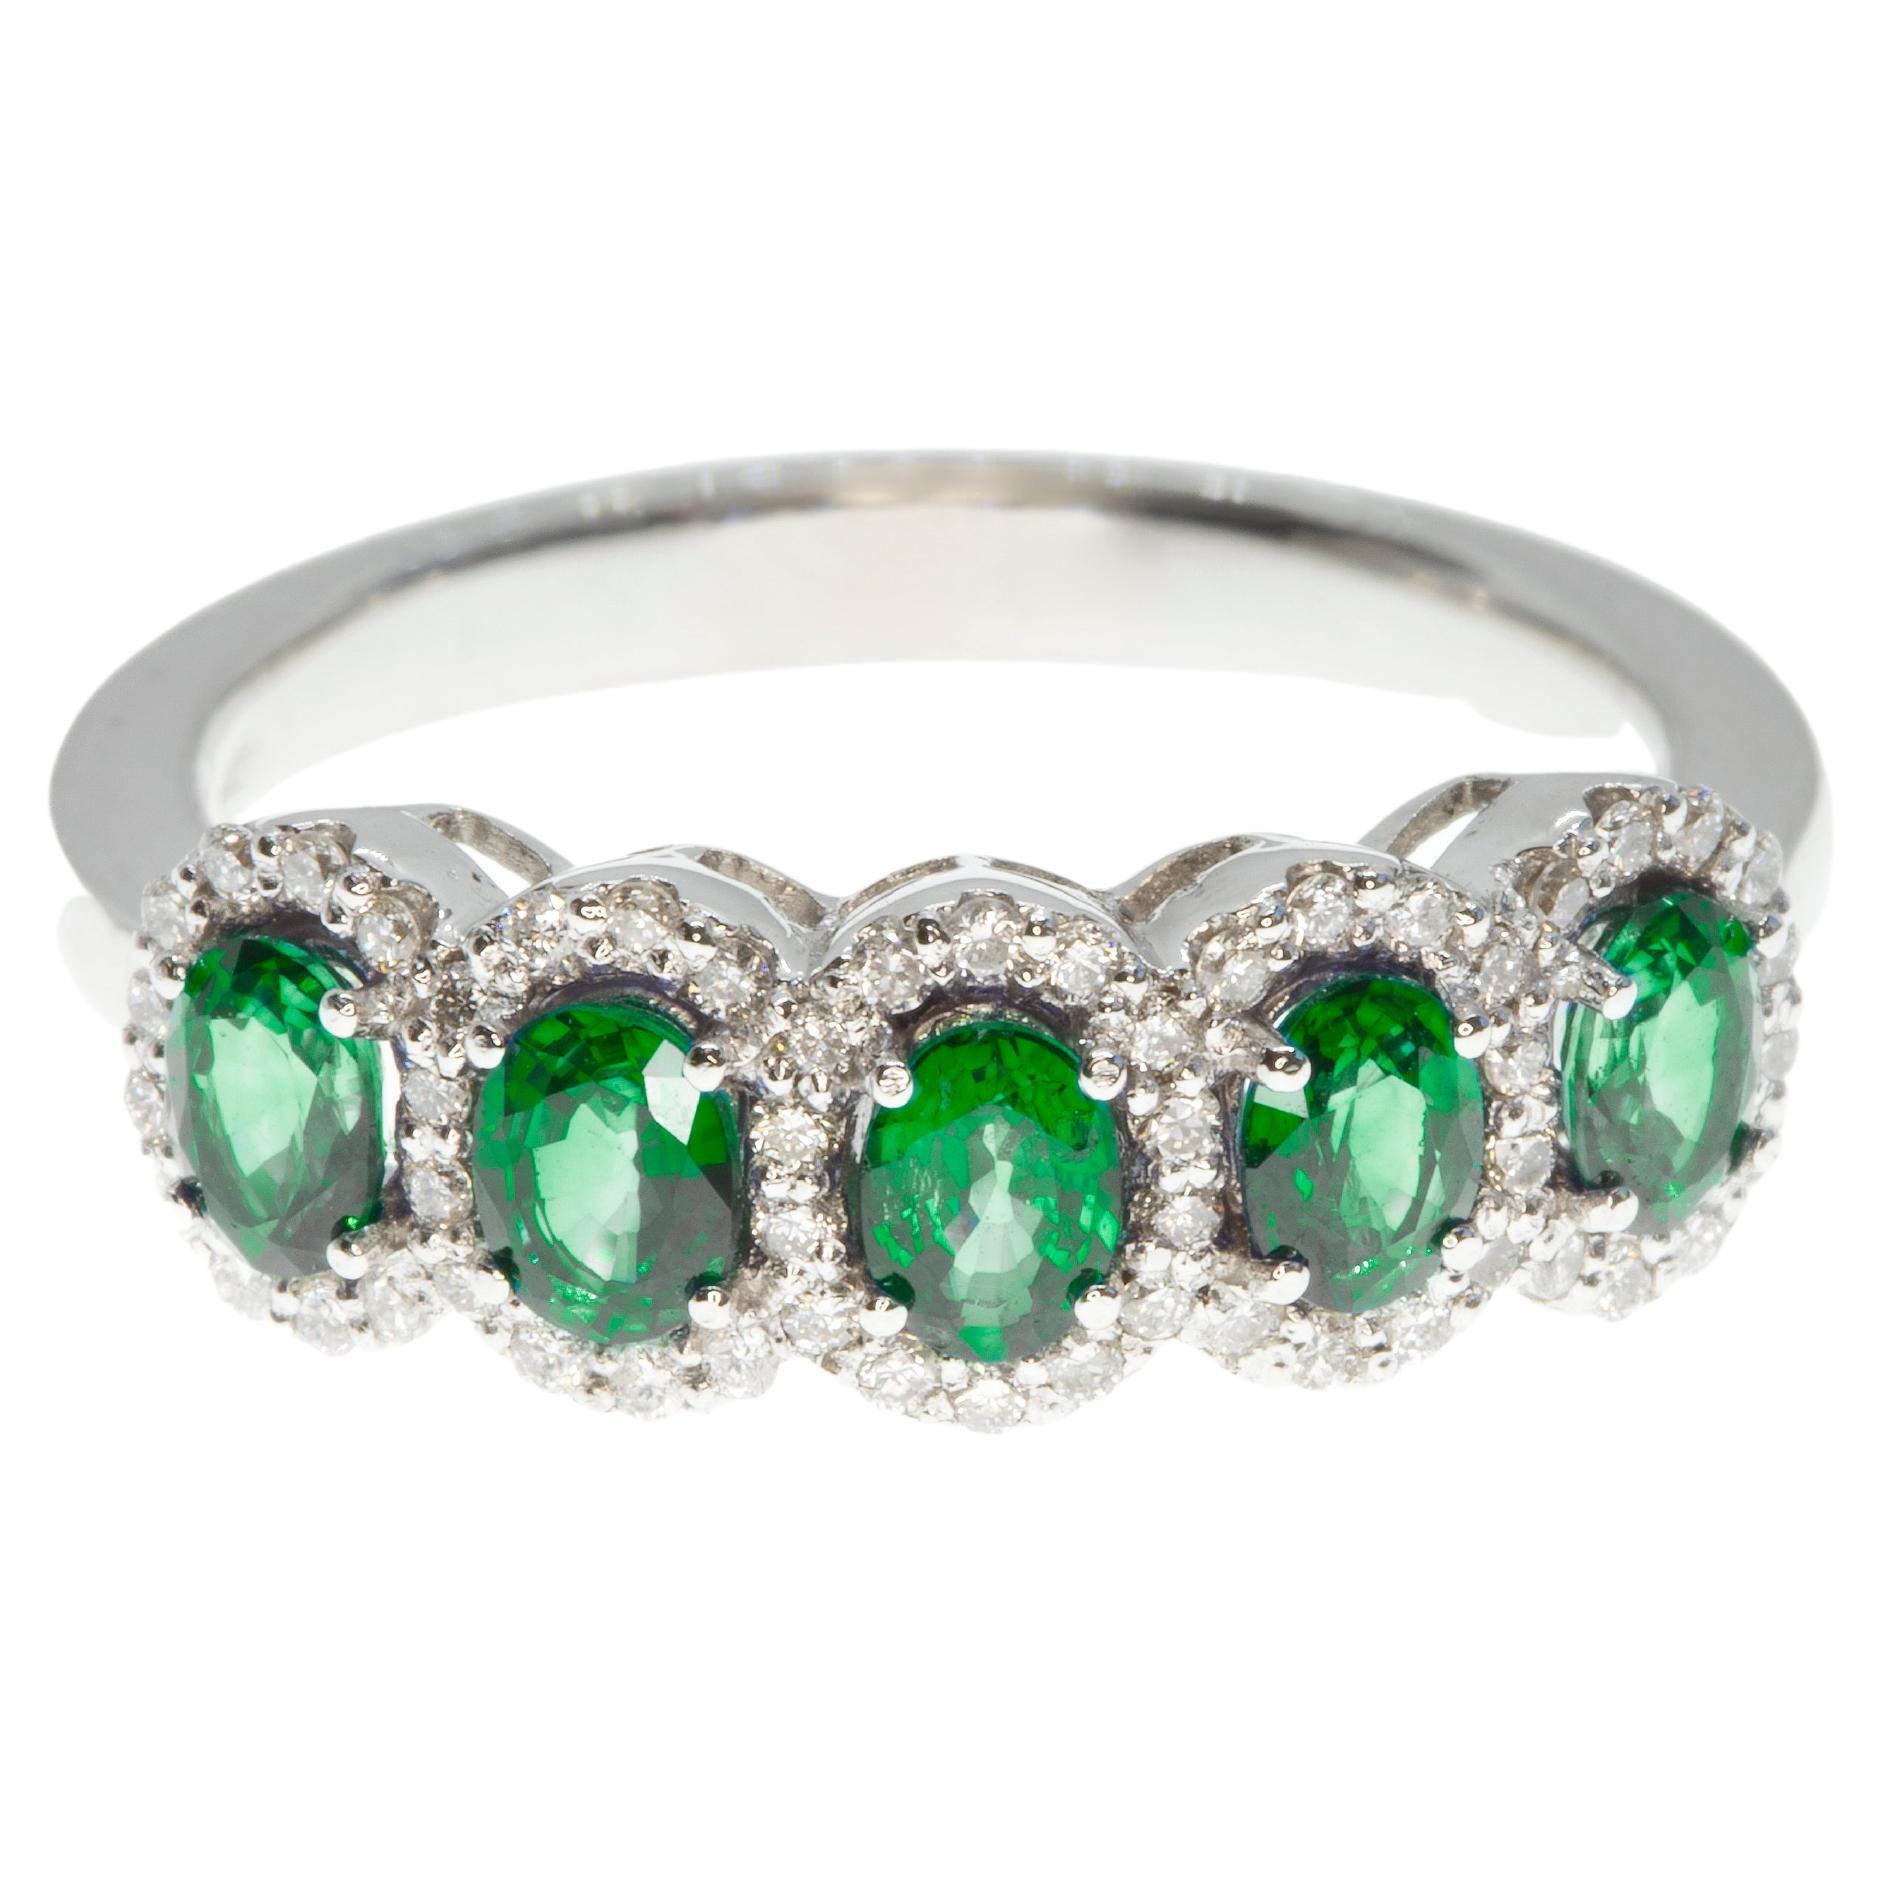 21st Century 18 Karat White Gold Diamond and Emerald Cocktail Anniversary Ring For Sale